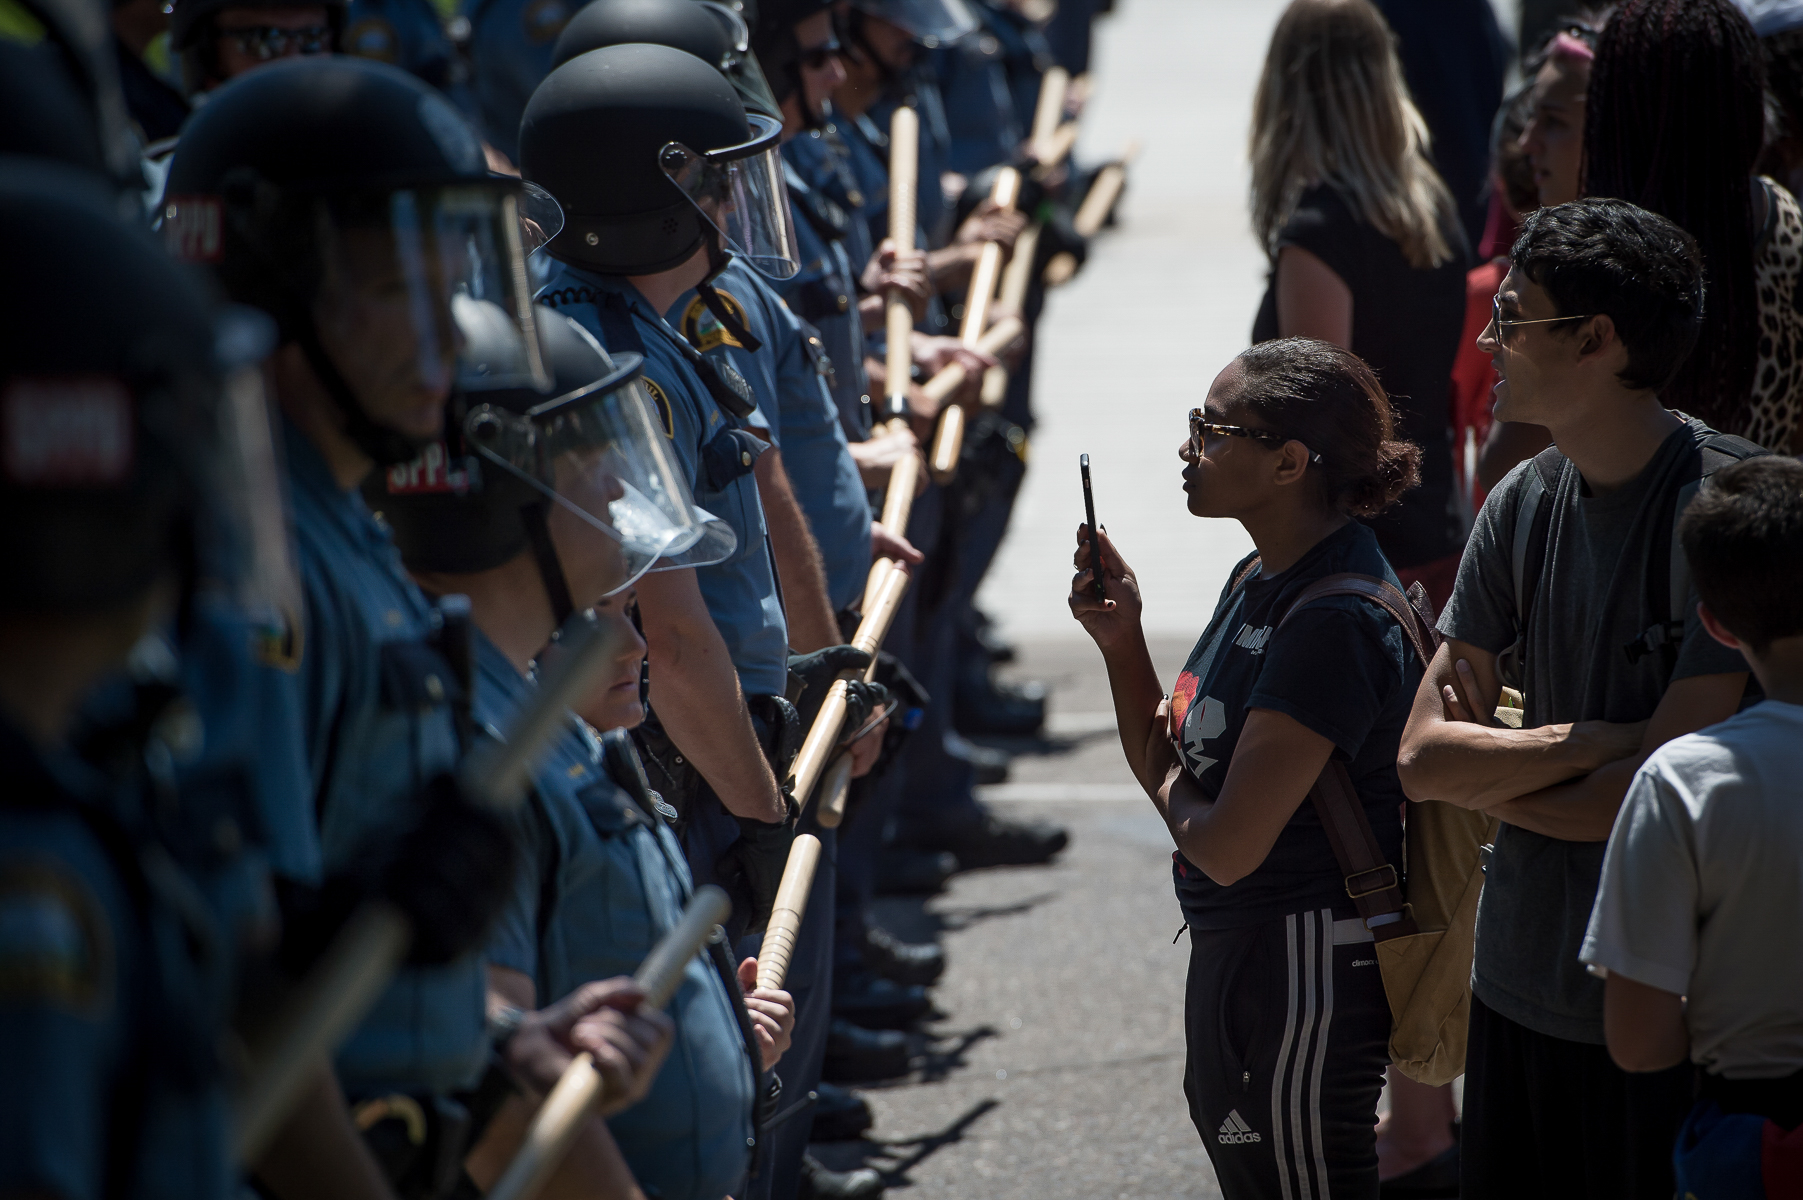 Equipped with just her phone, a protester documents a standoff between police and protesters after law enforcement removed protesters from an encampment outside the Governor’s mansion in St. Paul, MN on July 26, 2016. On July 6, 2016, Philando Castile was killed by a police officer during a traffic stop in St. Paul, MN. For over two weeks, community members held rallies and occupied the space outside the Governor’s mansion in protest of another police killing of a black man. On July 26, law enforcement removed the protesters from the occupation.